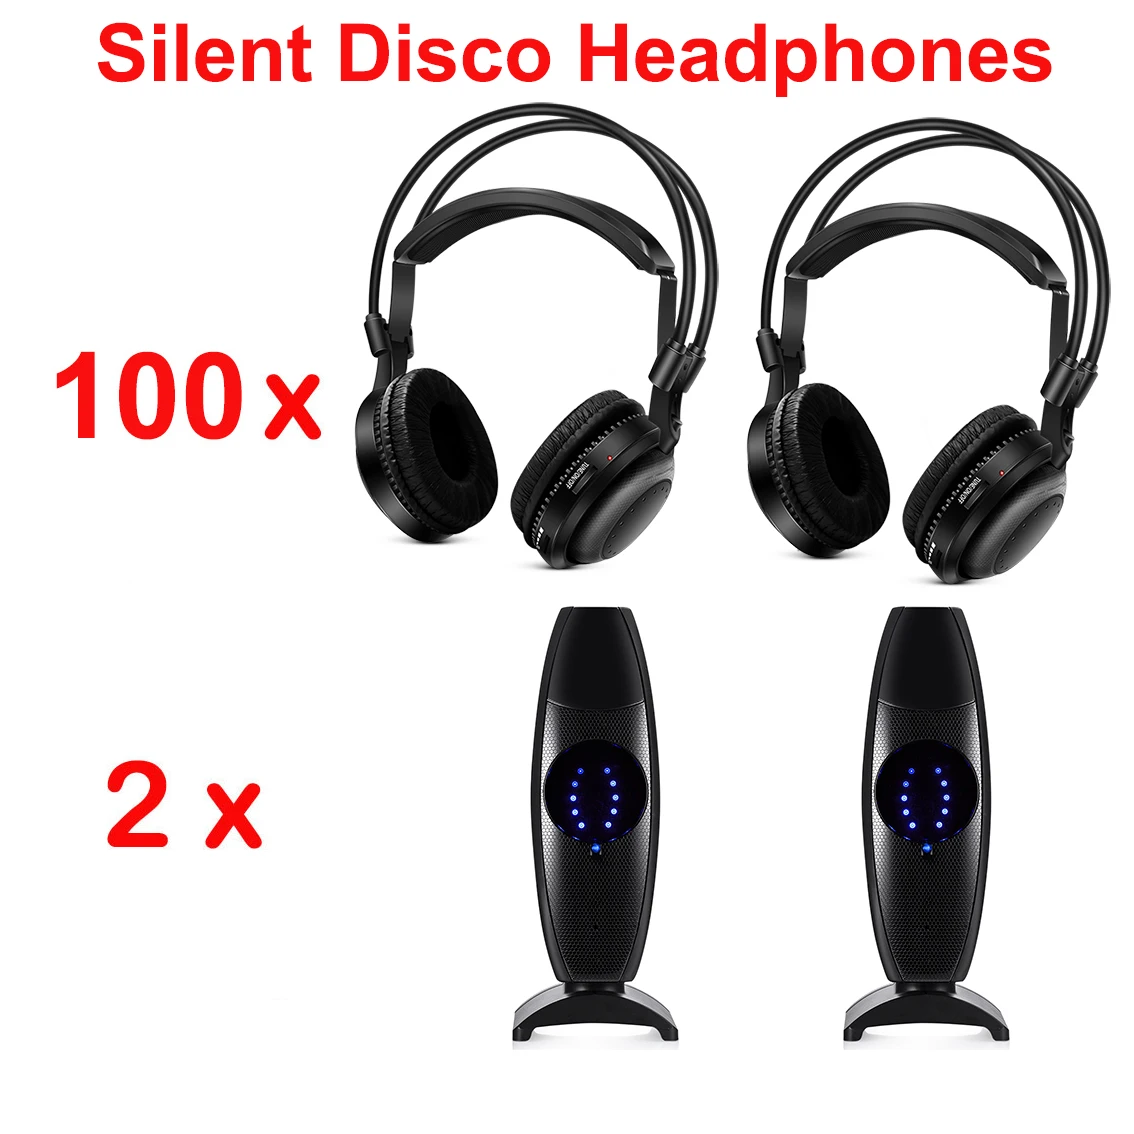 

Professional Silent Disco Compete System Wireless Headphones - Quiet Clubbing Party Bundle (100 Headsets + 2 Transmitters)